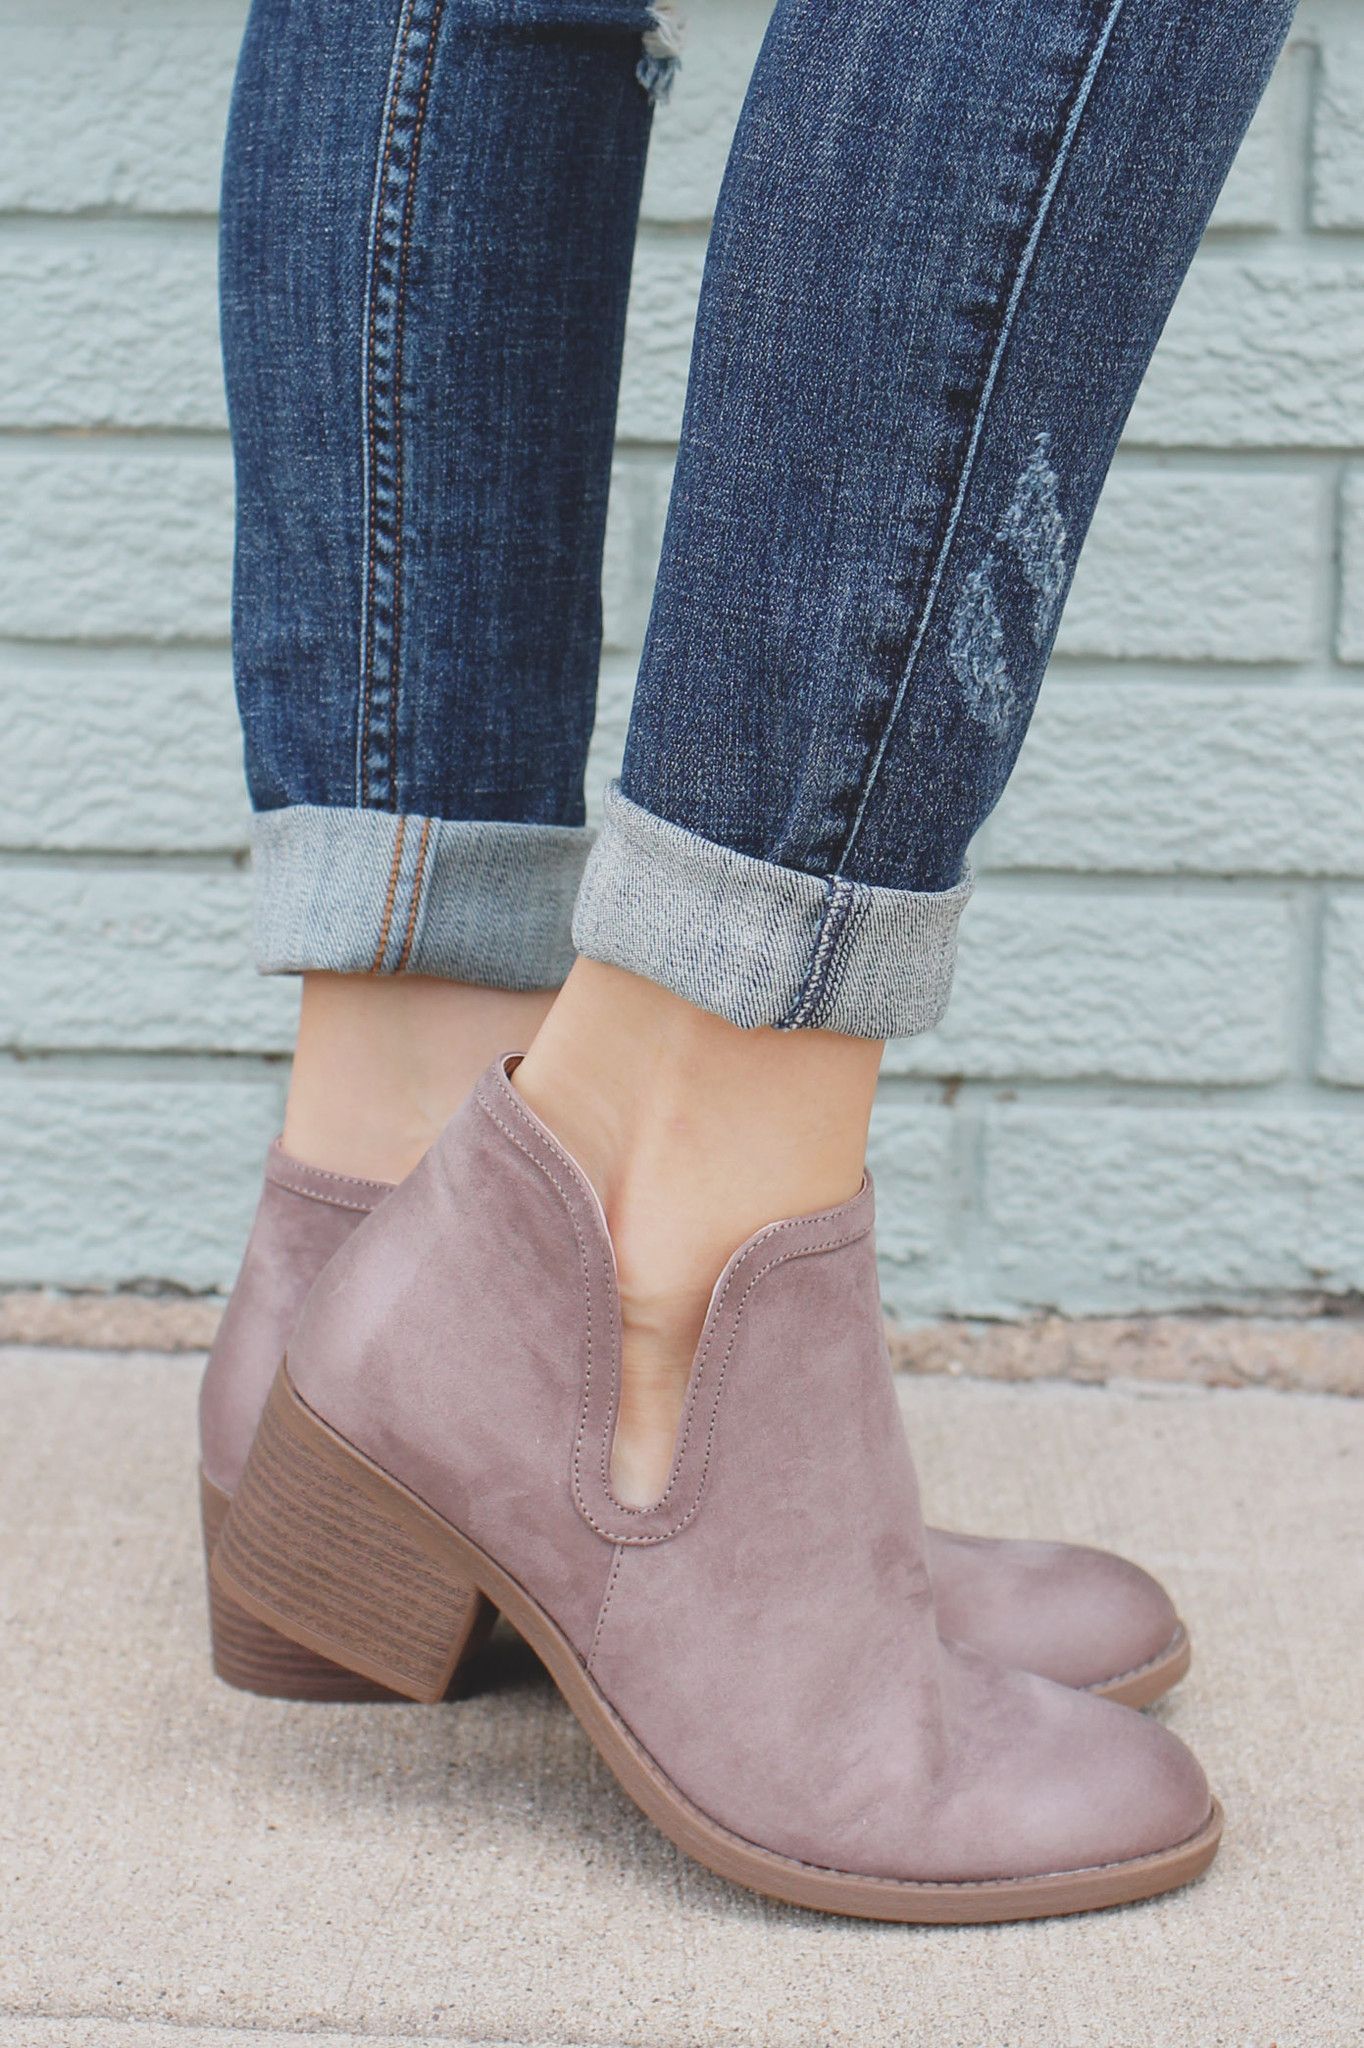 Our Everyday Legend Booties keeping you on trend! #uoionline